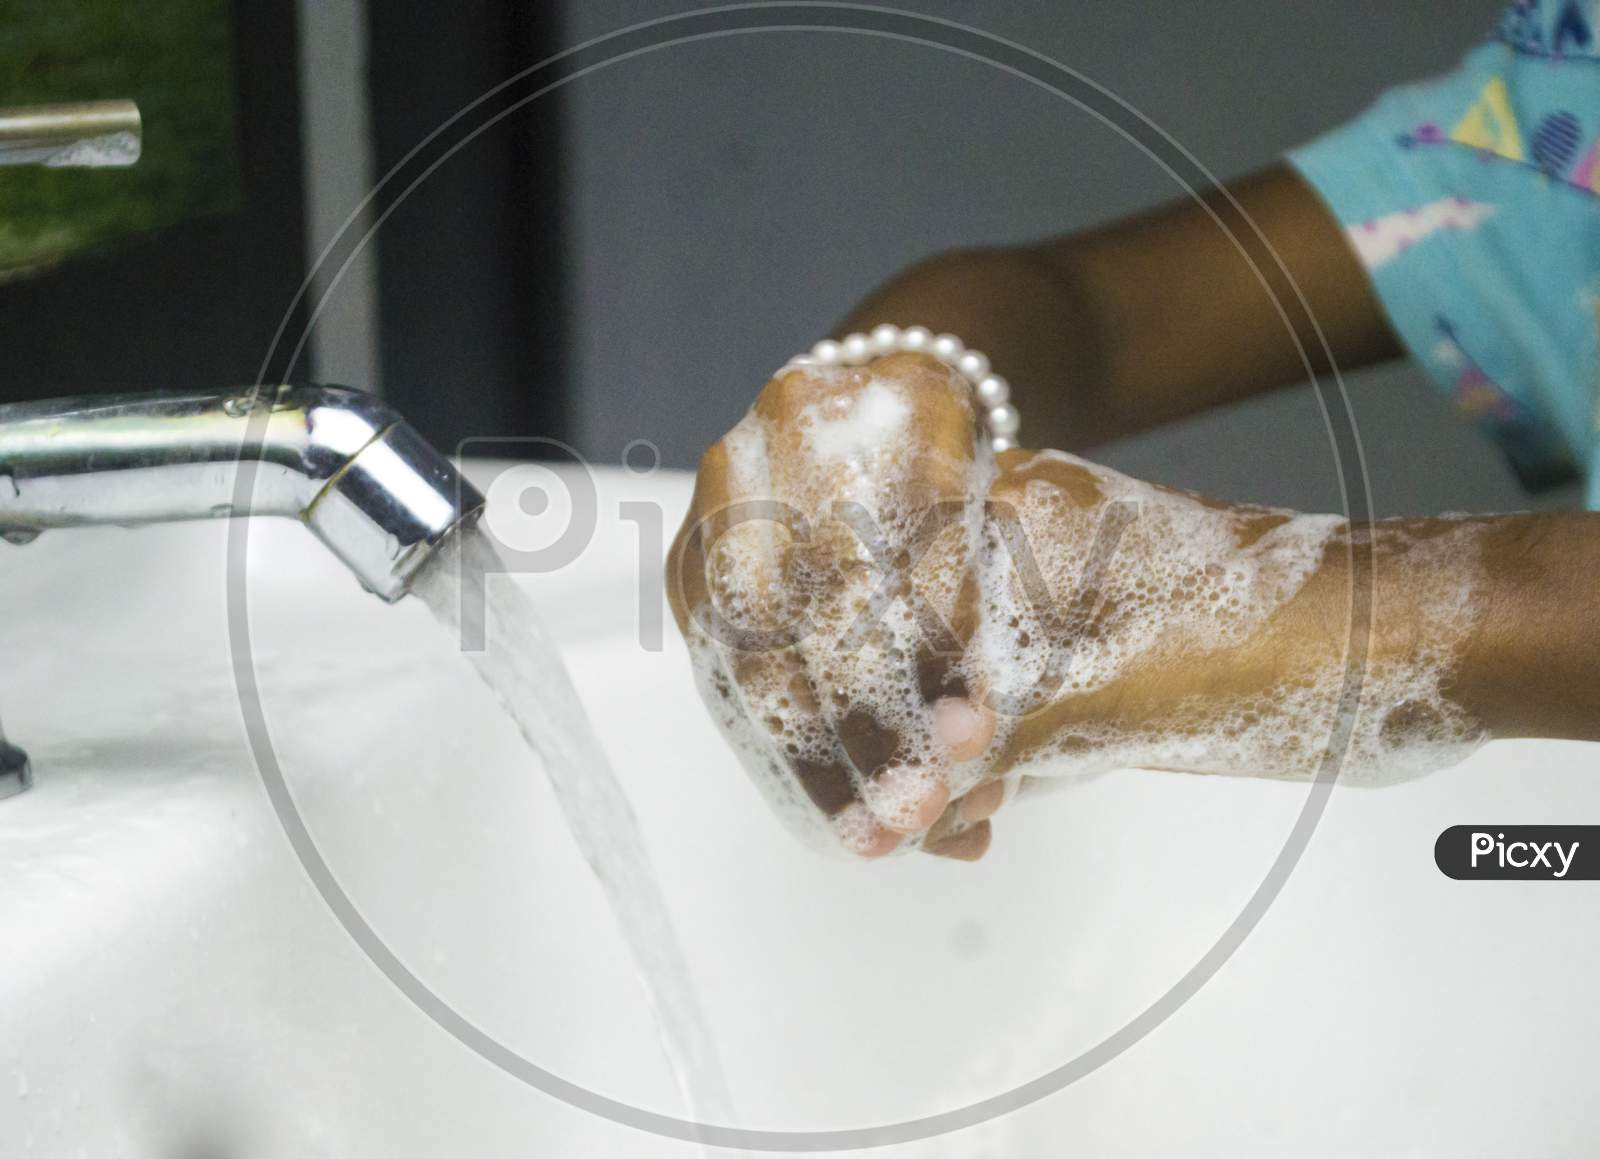 Washing And Rubbing With Soap Preventing Pandemic Virus And Keep Hygienic